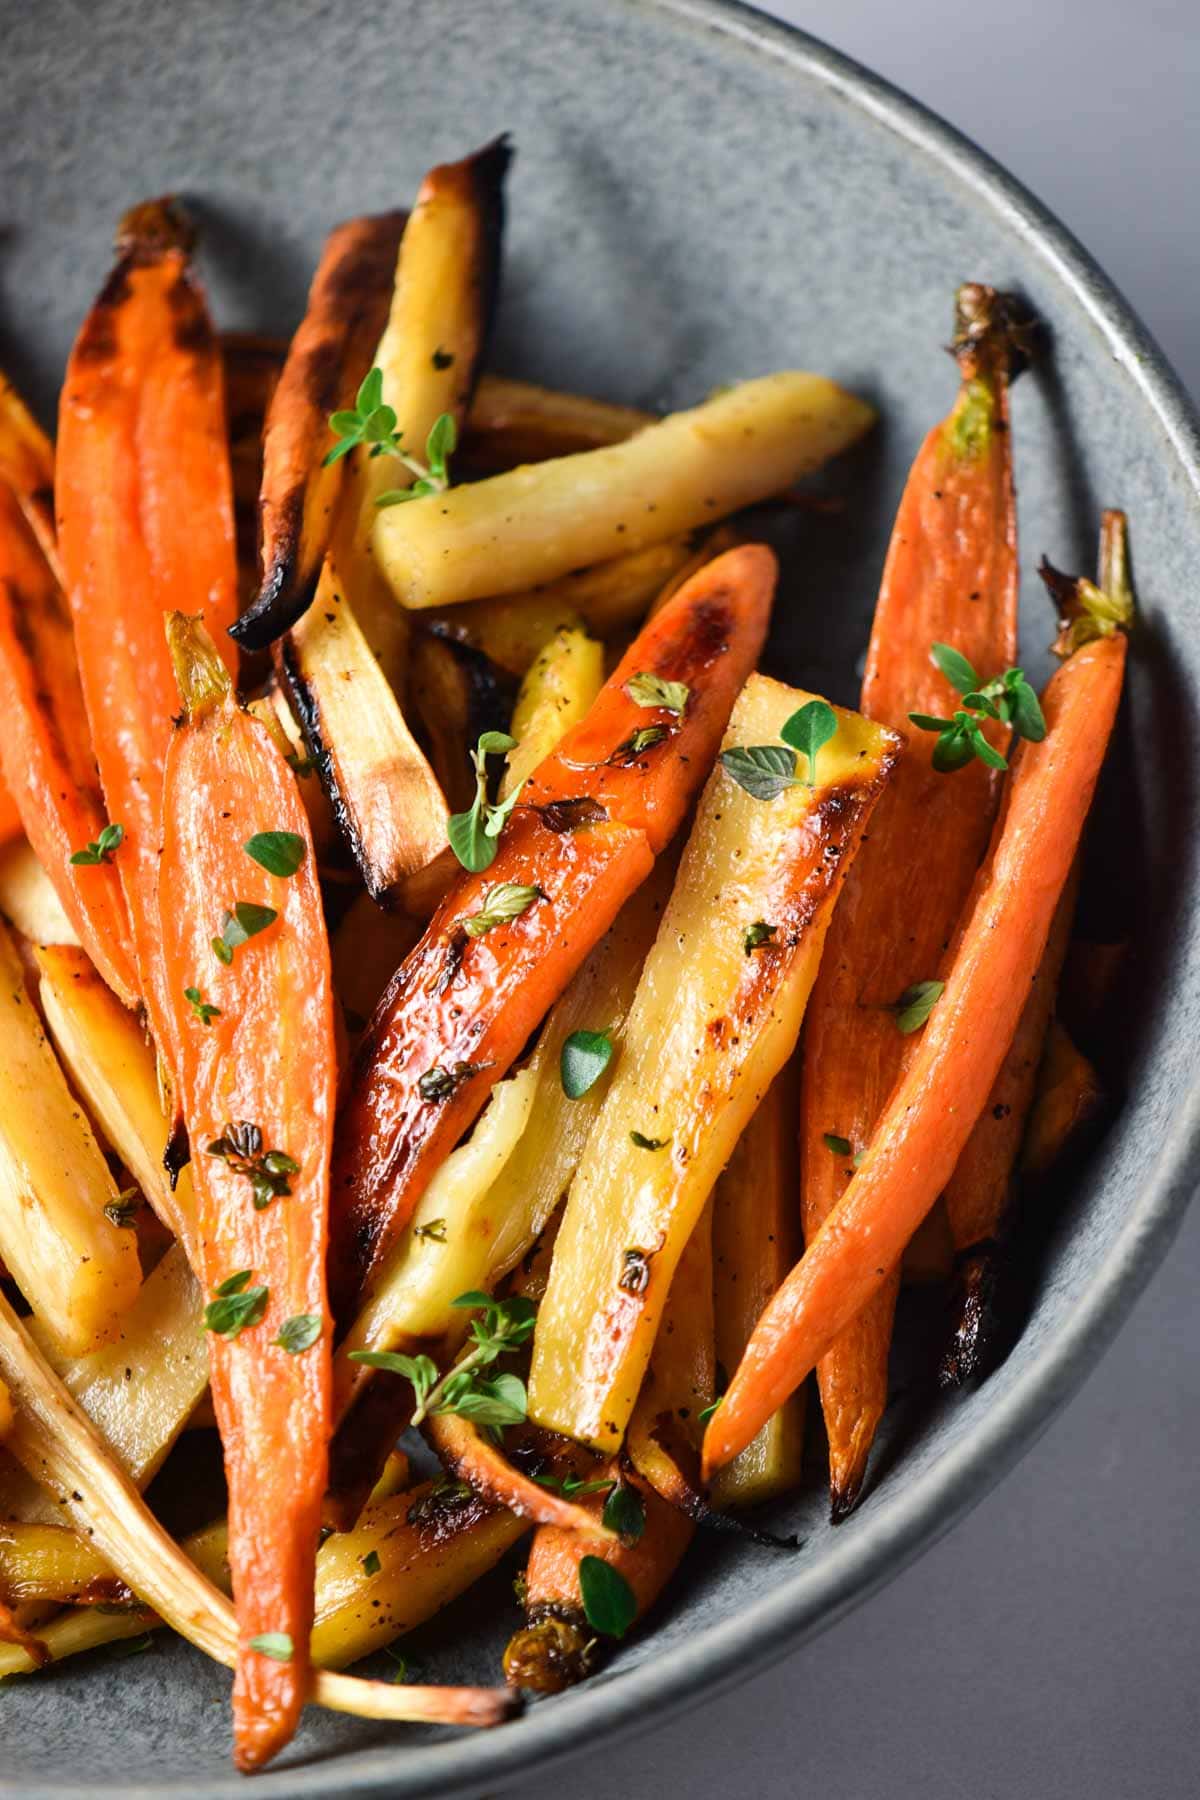 Honey roasted carrots and parsnips topped with thyme leaves.